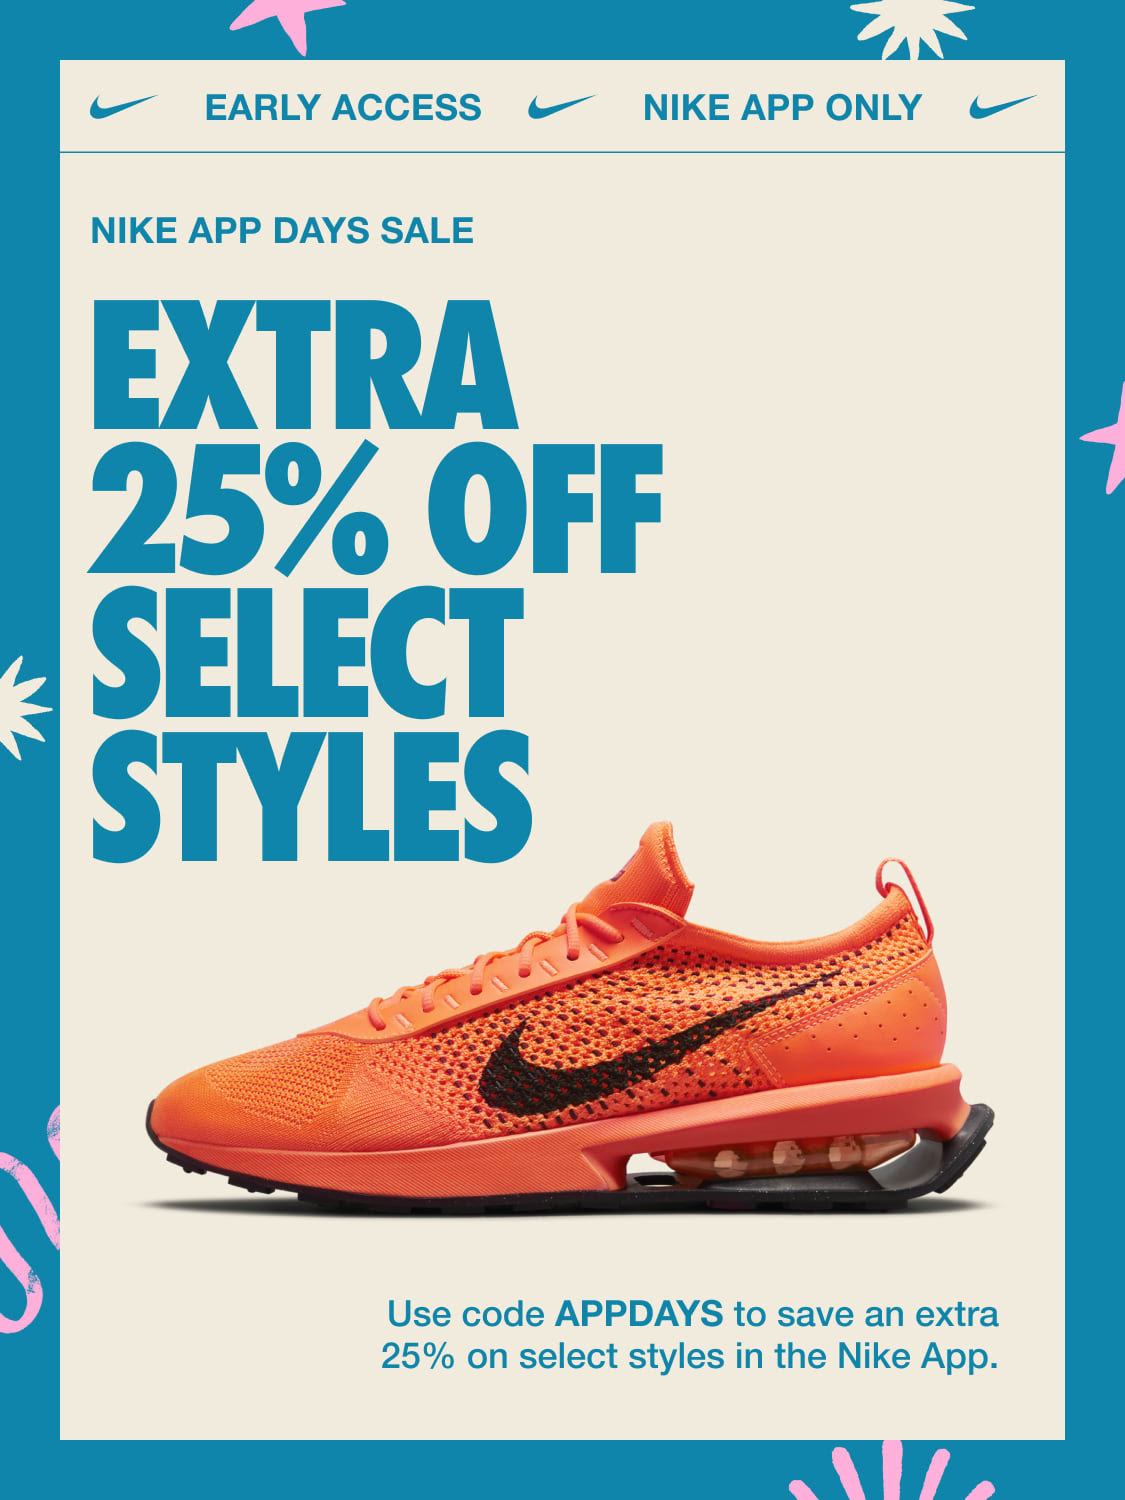 Nike App Only 📱 Get an extra 25% off select styles—and be entered to win 1 of 7 $500 Nike gift cards. Ends 9.17